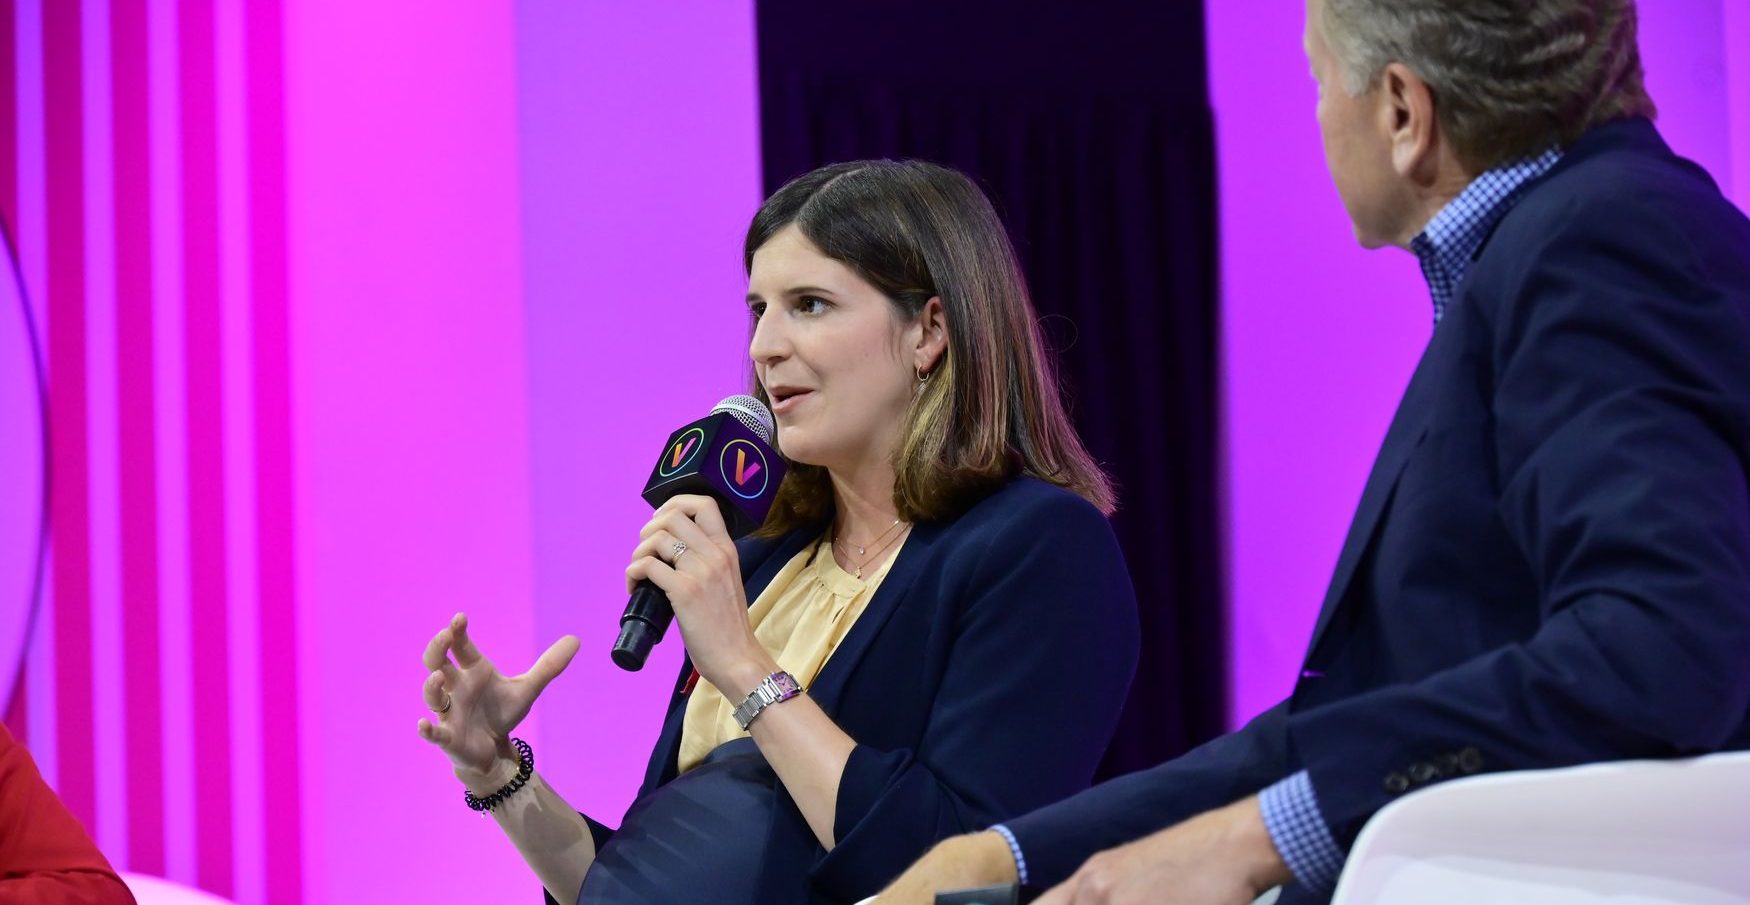 An image of Clara Chappaz, director of La French Tech, on stage Credit: Vivatech